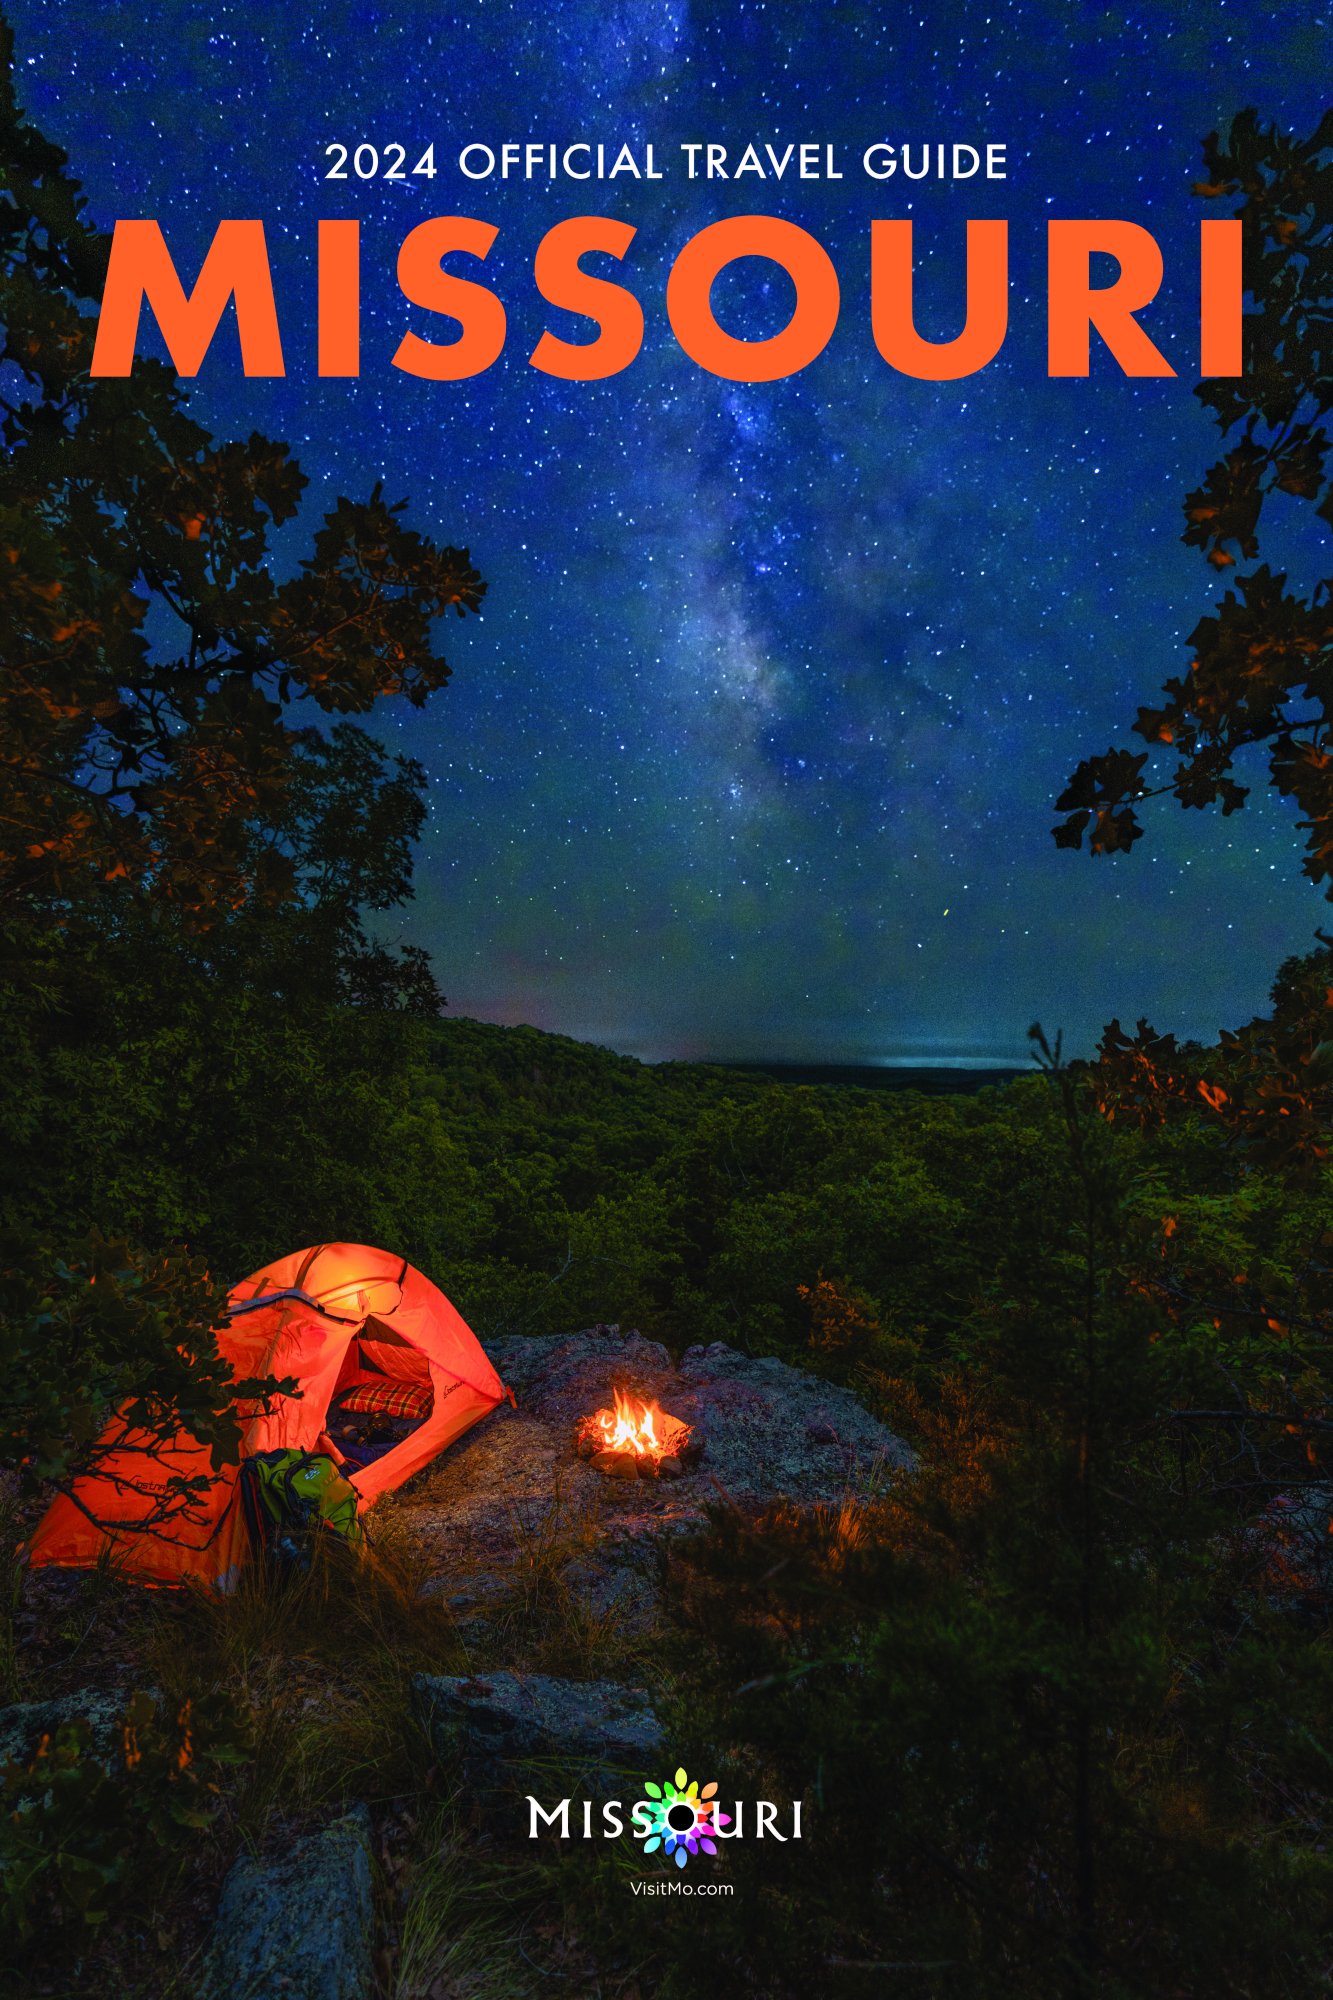 Missouri — 2025 Official Travel Guide